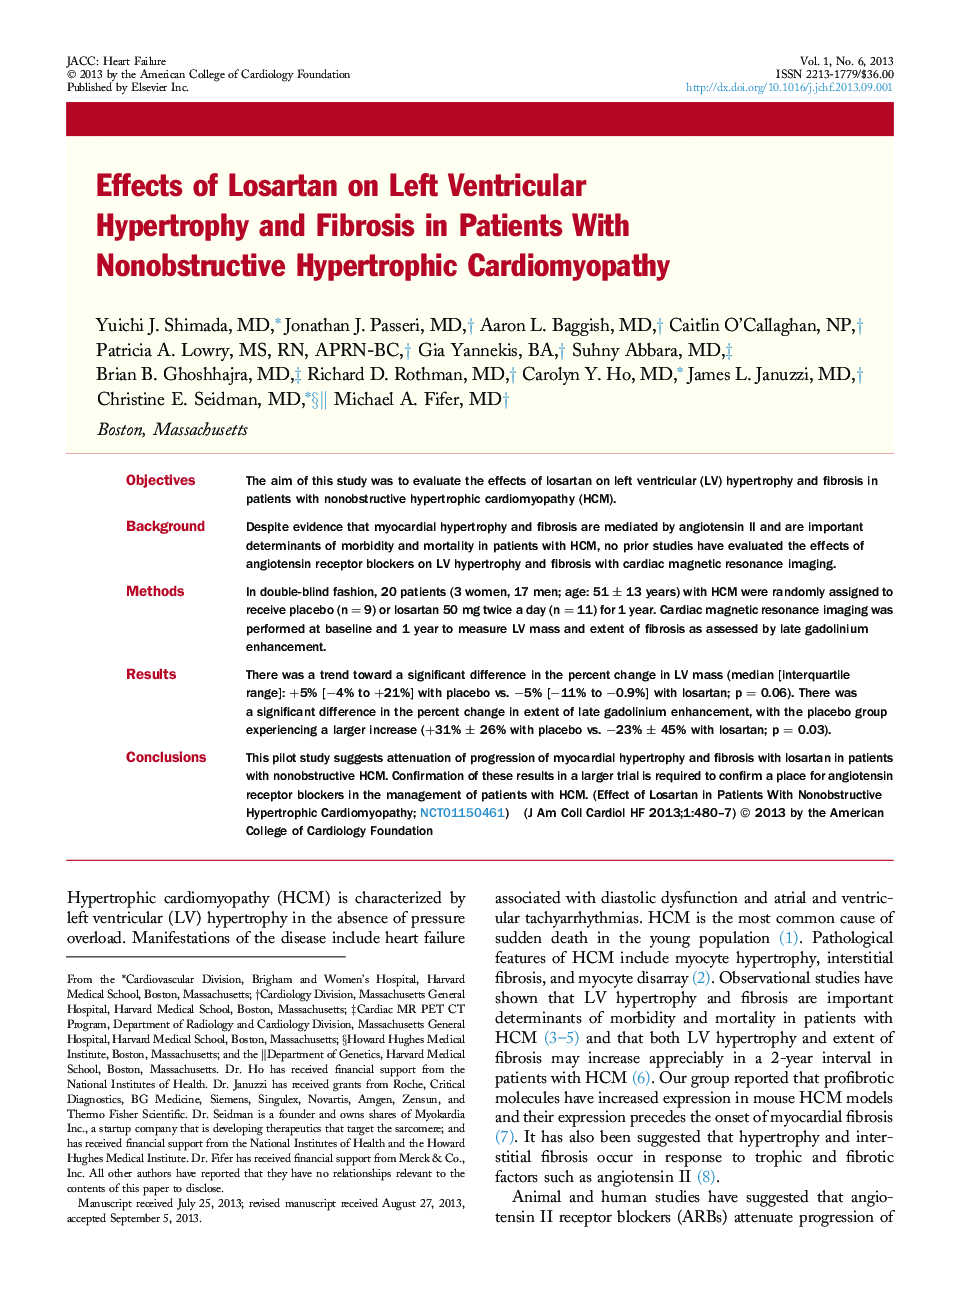 Effects of Losartan on Left Ventricular Hypertrophy and Fibrosis in Patients With Nonobstructive Hypertrophic Cardiomyopathy 